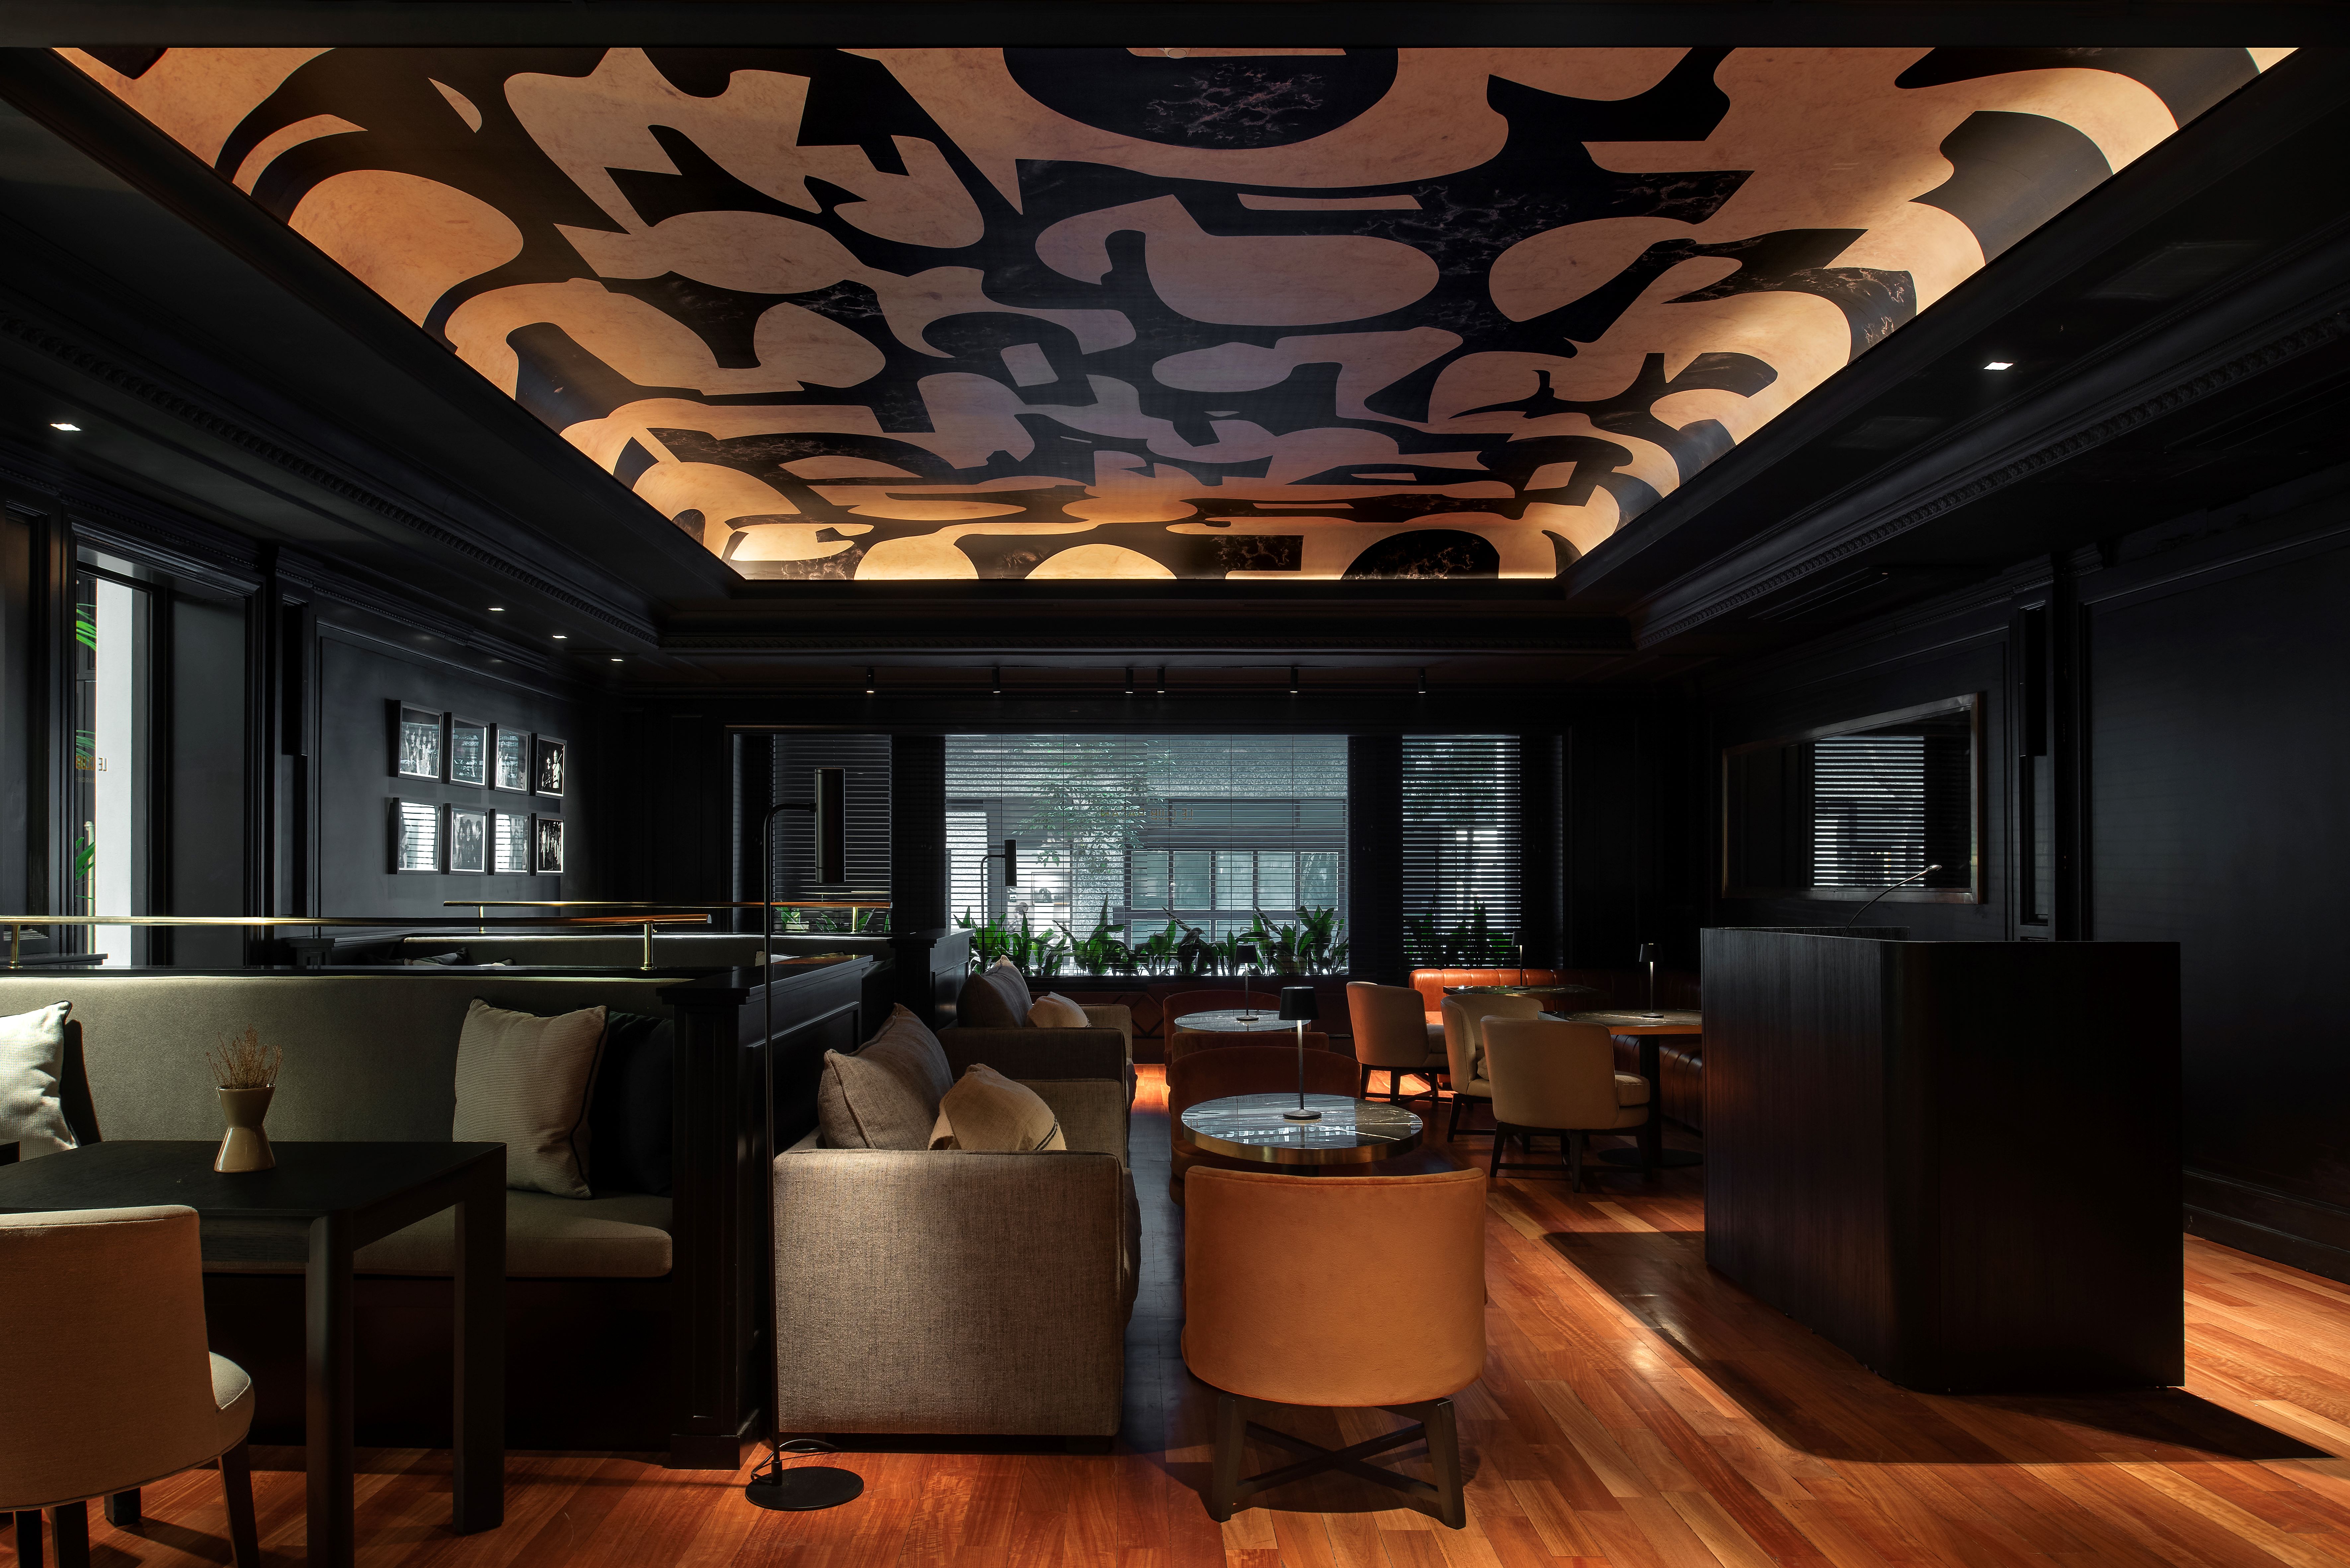 Hotel Casa Lucía, dark bar/lounge with patterned ceiling